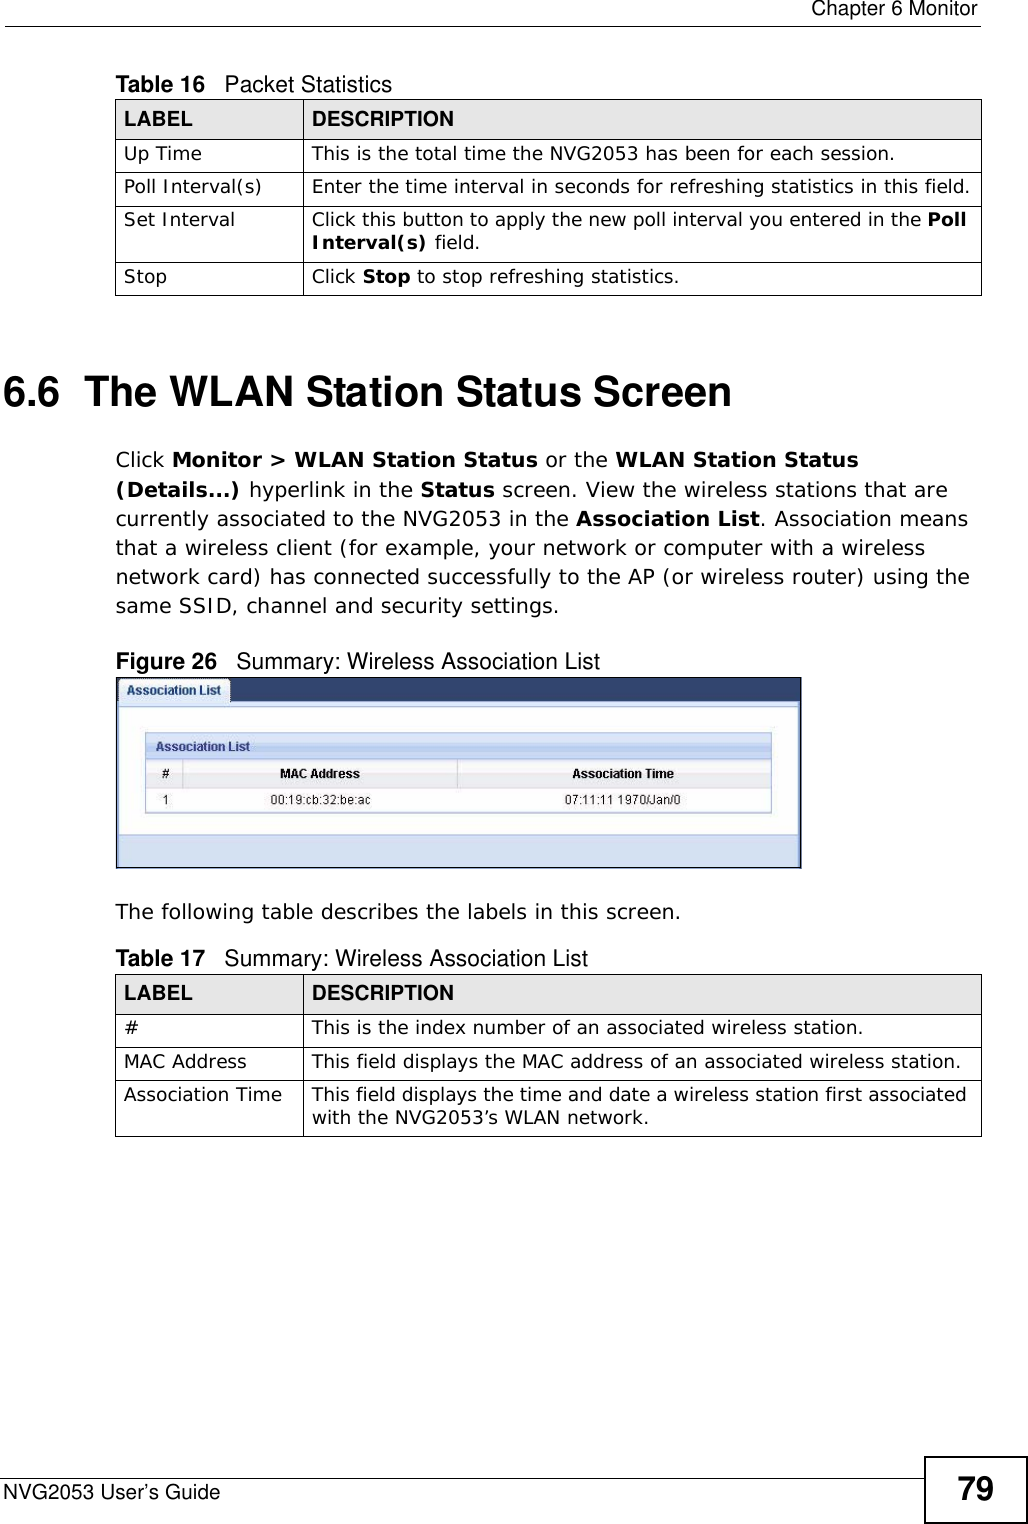  Chapter 6 MonitorNVG2053 User’s Guide 796.6  The WLAN Station Status Screen     Click Monitor &gt; WLAN Station Status or the WLAN Station Status (Details...) hyperlink in the Status screen. View the wireless stations that are currently associated to the NVG2053 in the Association List. Association means that a wireless client (for example, your network or computer with a wireless network card) has connected successfully to the AP (or wireless router) using the same SSID, channel and security settings.Figure 26   Summary: Wireless Association ListThe following table describes the labels in this screen.Up Time This is the total time the NVG2053 has been for each session.Poll Interval(s) Enter the time interval in seconds for refreshing statistics in this field.Set Interval Click this button to apply the new poll interval you entered in the Poll Interval(s) field.Stop Click Stop to stop refreshing statistics.Table 16   Packet StatisticsLABEL DESCRIPTIONTable 17   Summary: Wireless Association ListLABEL DESCRIPTION#  This is the index number of an associated wireless station. MAC Address  This field displays the MAC address of an associated wireless station.Association Time This field displays the time and date a wireless station first associated with the NVG2053’s WLAN network.